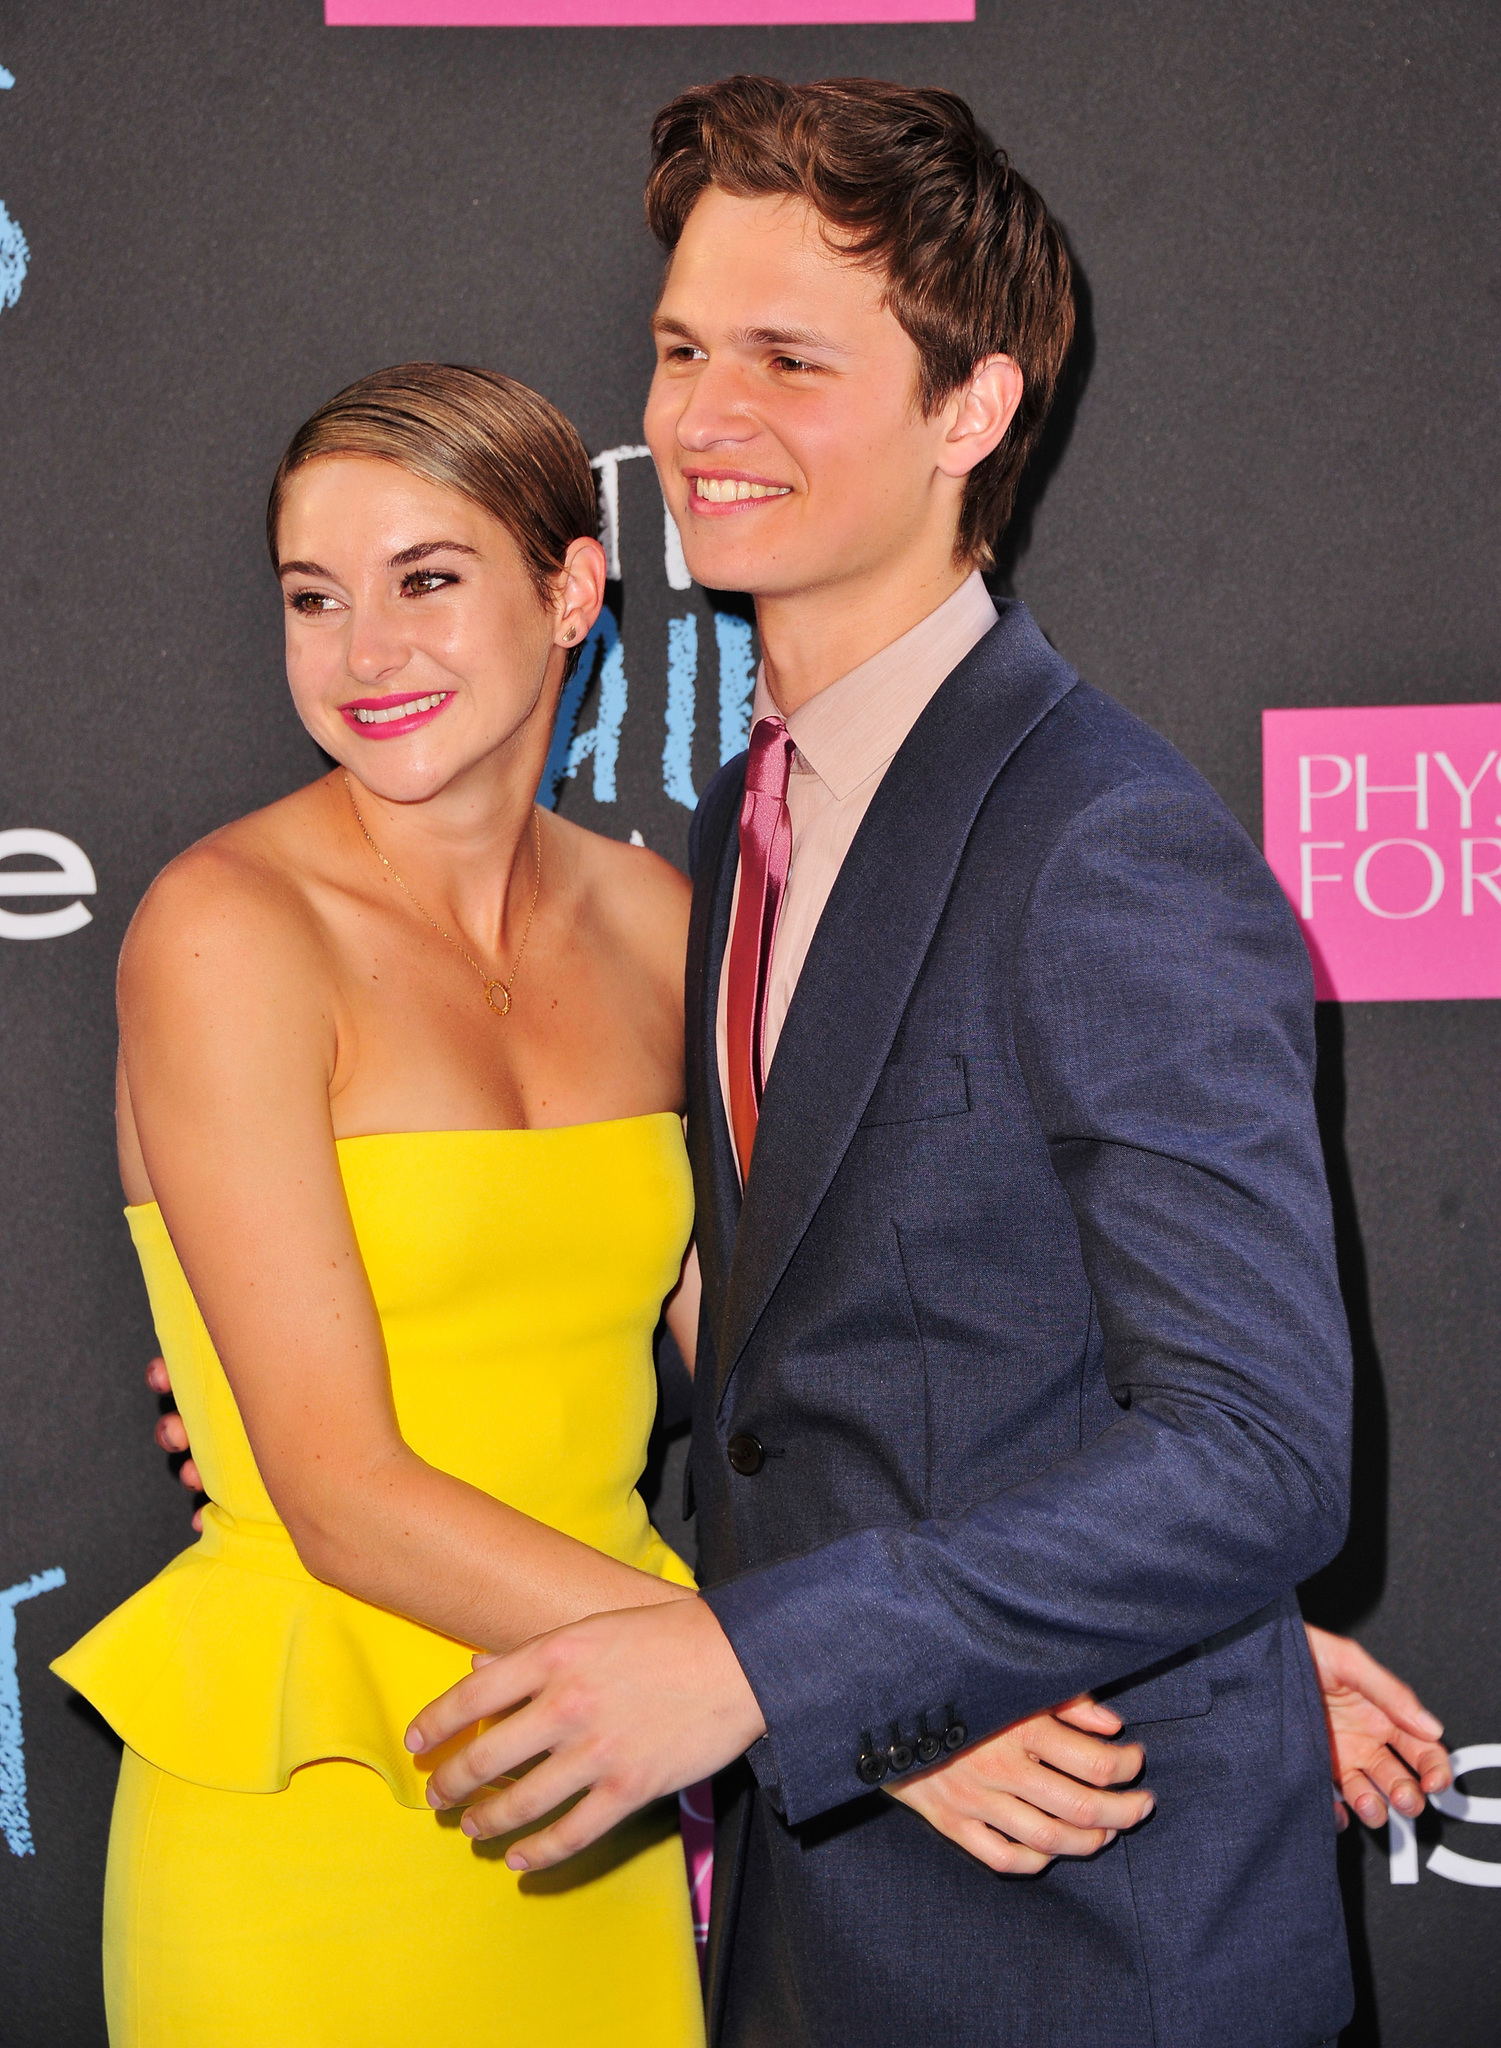 Shailene Woodley and Ansel Elgort at event of Del musu likimo ir zvaigzdes kaltos (2014)